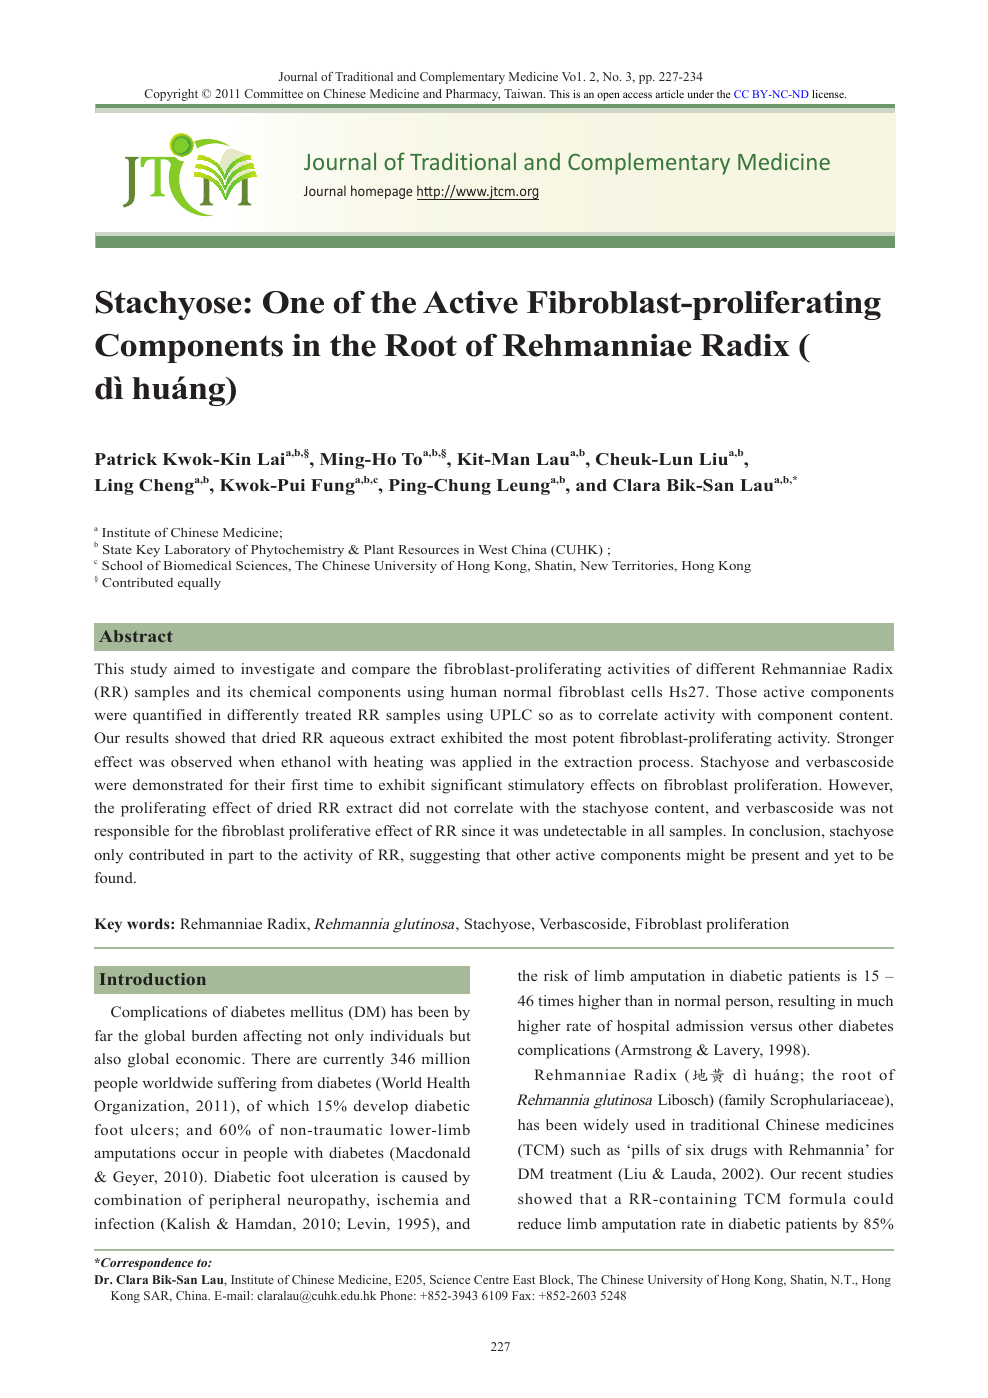 Stachyose One Of The Active Fibroblast Proliferating Components In The Root Of Rehmanniae Radix 地黃 Di Huang Topic Of Research Paper In Chemical Sciences Download Scholarly Article Pdf And Read For Free